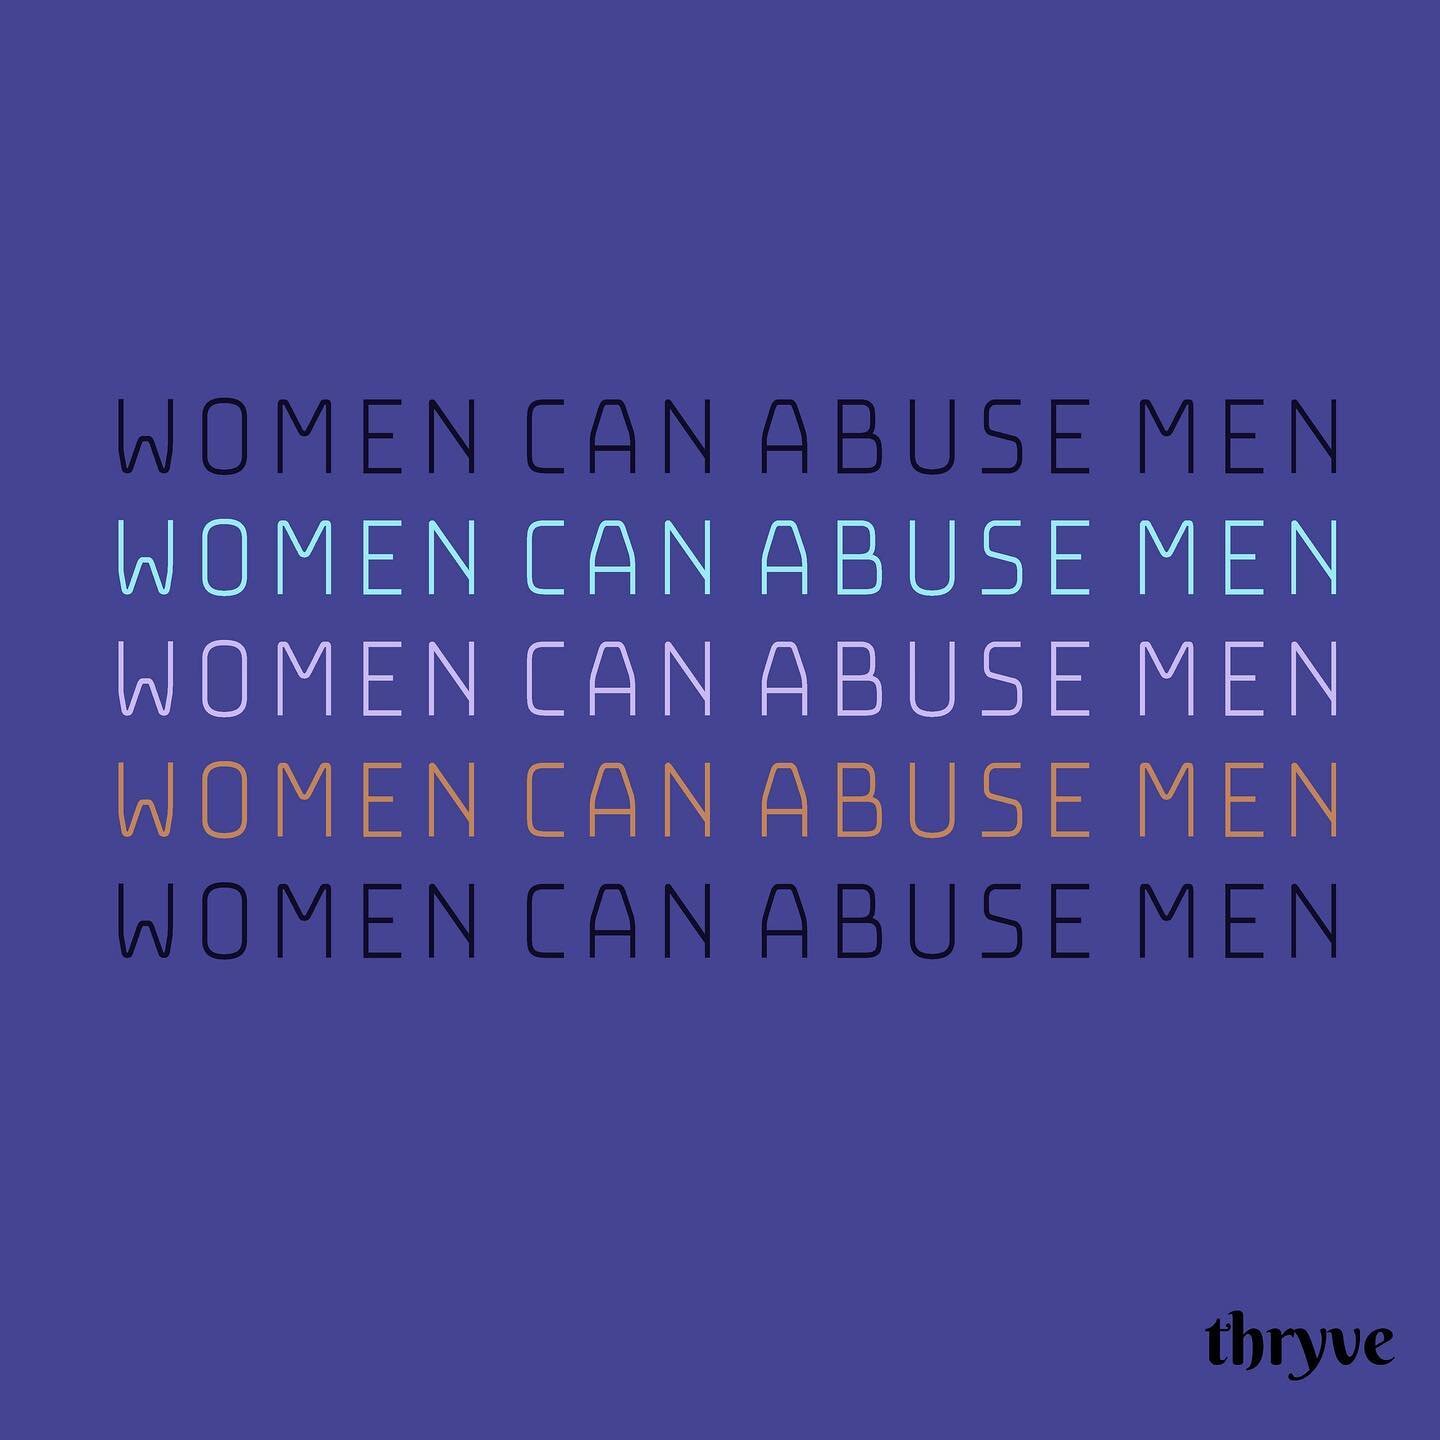 Women abuse men too. 💁🏼&zwj;♂️ ⠀
1 in 9 men experience severe partner violence, sexual violence, and/or stalking. Lets #EndTheStigma that men don&rsquo;t experience domestic abuse. ⠀
⠀
USA National DV Hotline 1-800-799-7233⠀
USA Gay Men&rsquo;s DV 